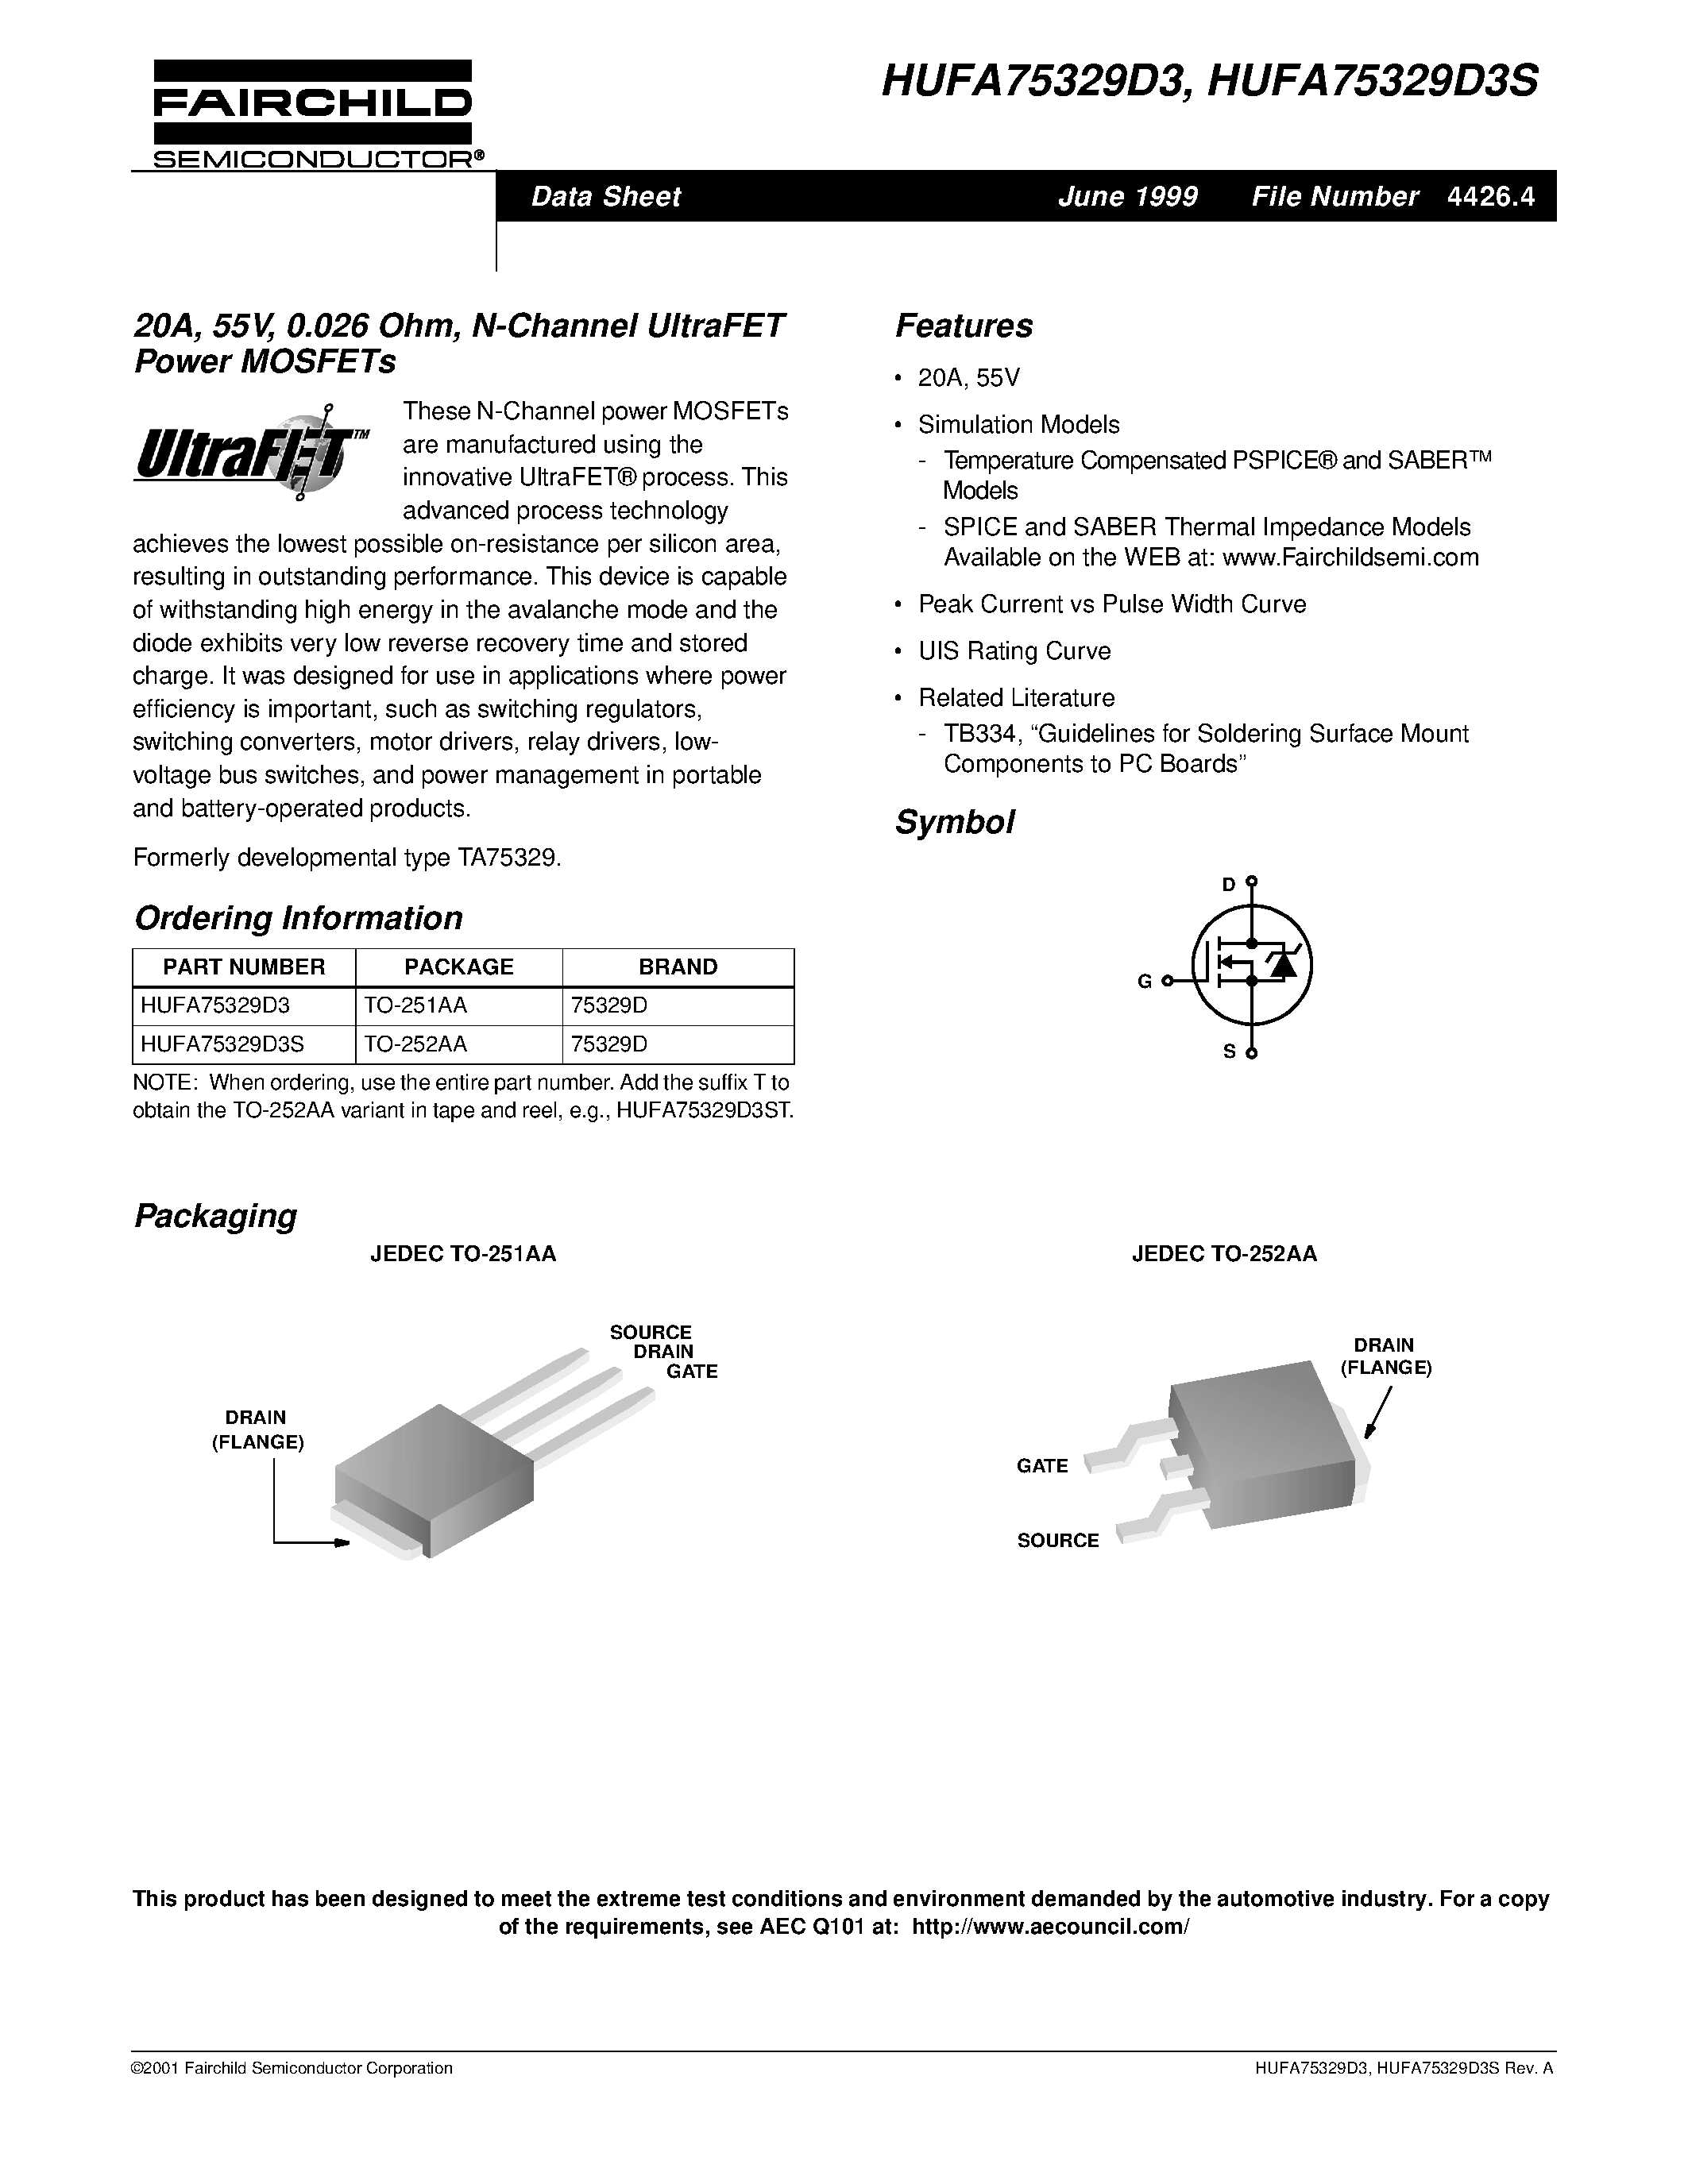 Datasheet HUFA75329D3 - 20A/ 55V/ 0.026 Ohm/ N-Channel UltraFET Power MOSFETs page 1